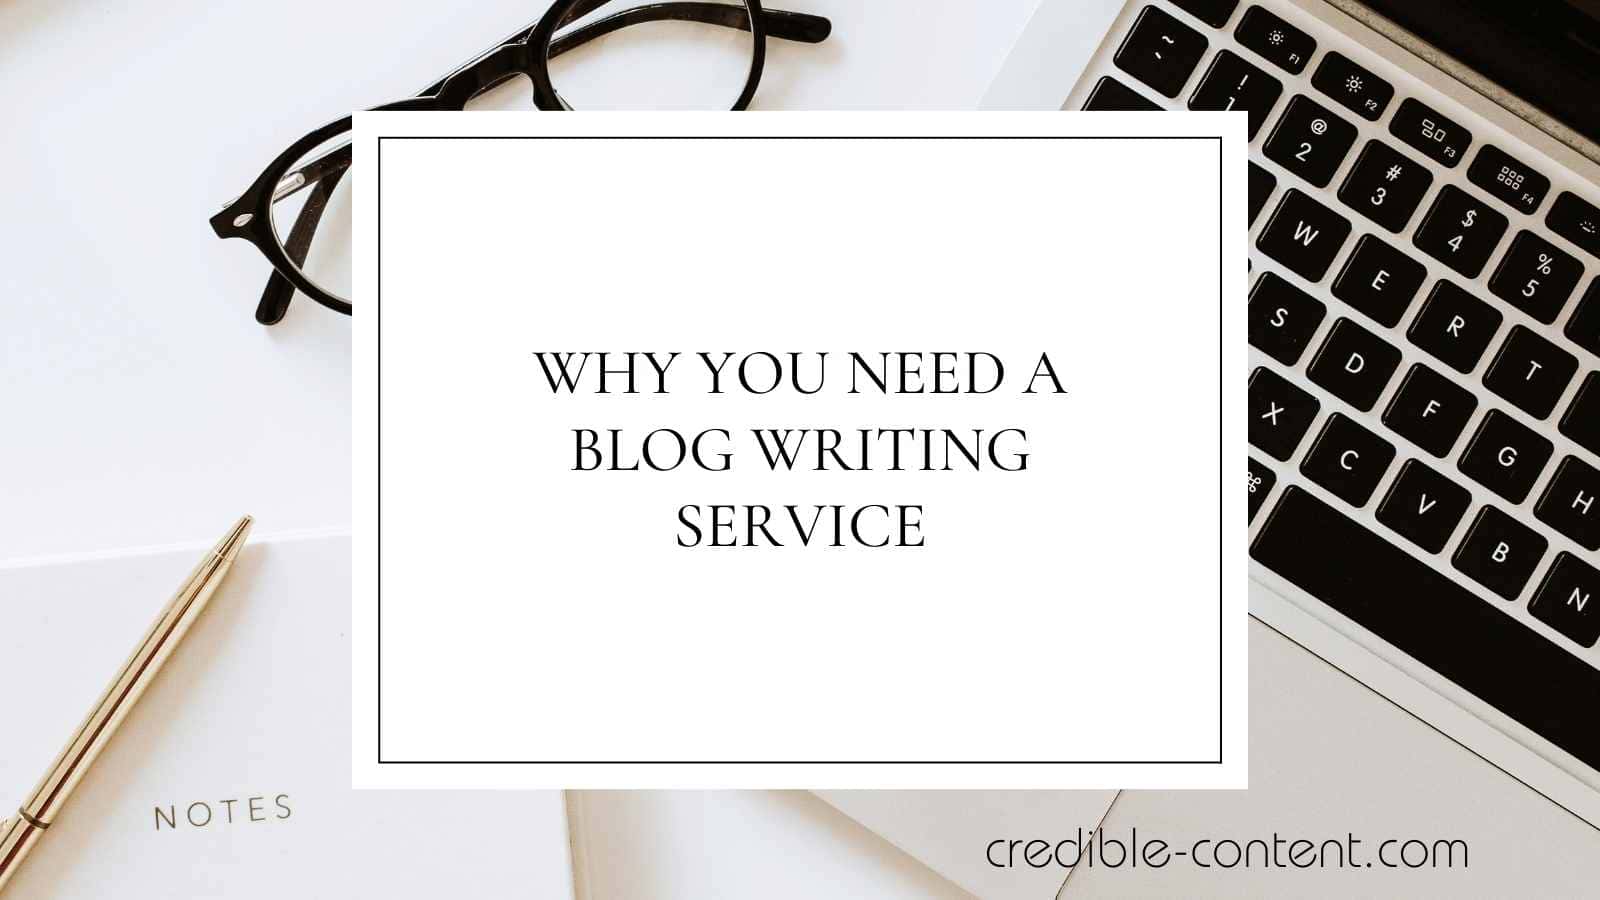 Why you need a blog writing service